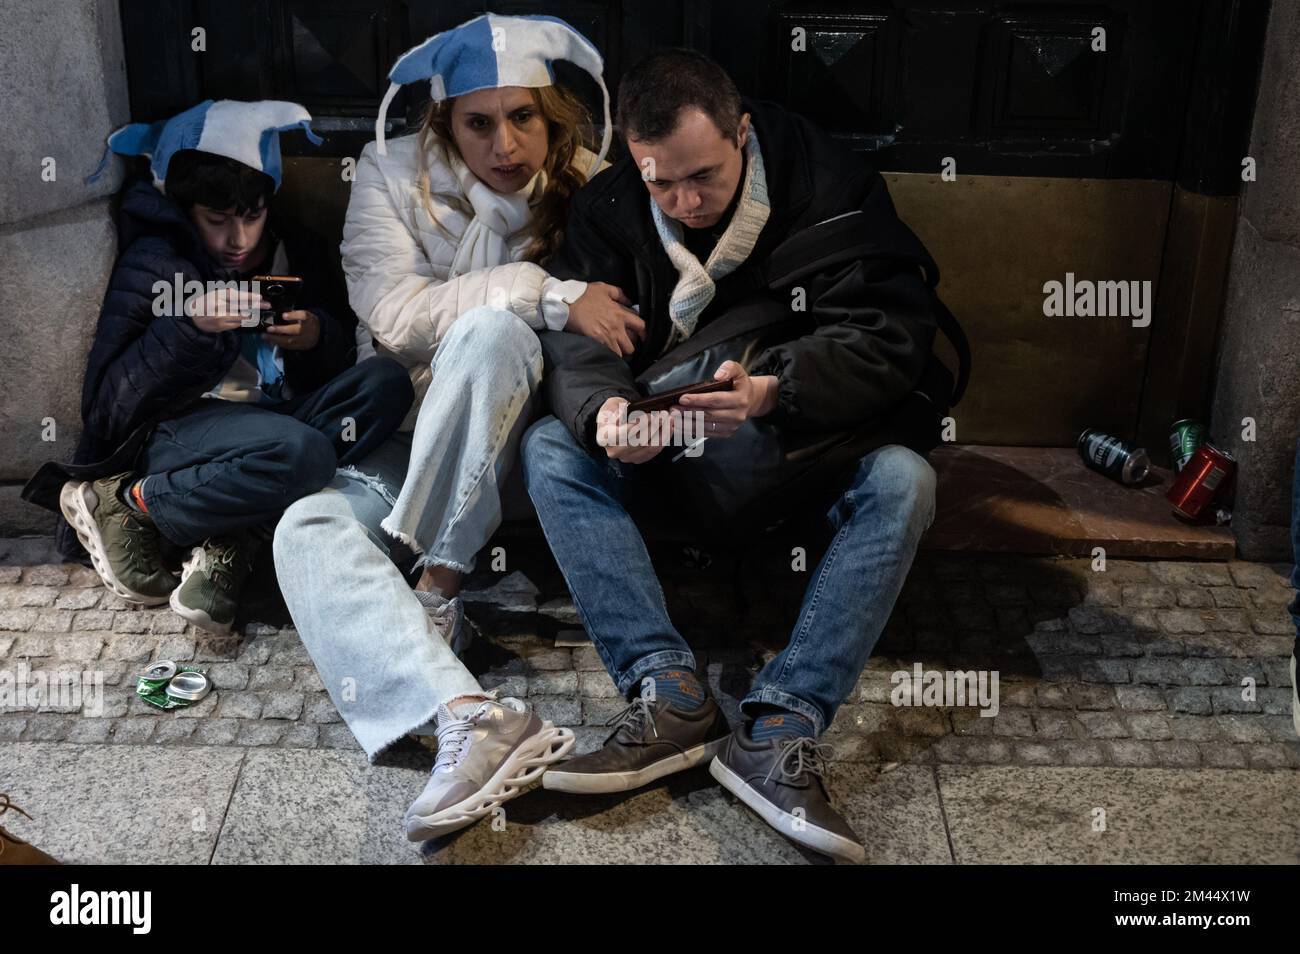 Madrid, Spain. 18th Dec, 2022. Argentinian fans watching the final match between Argentina and France on their mobiles. Argentina won the FIFA World Cup Qatar 2022 defeating France on a match that ended in a 3-3 draw, winning the championship title after penalties (4-2). Credit: Marcos del Mazo/Alamy Live News Stock Photo